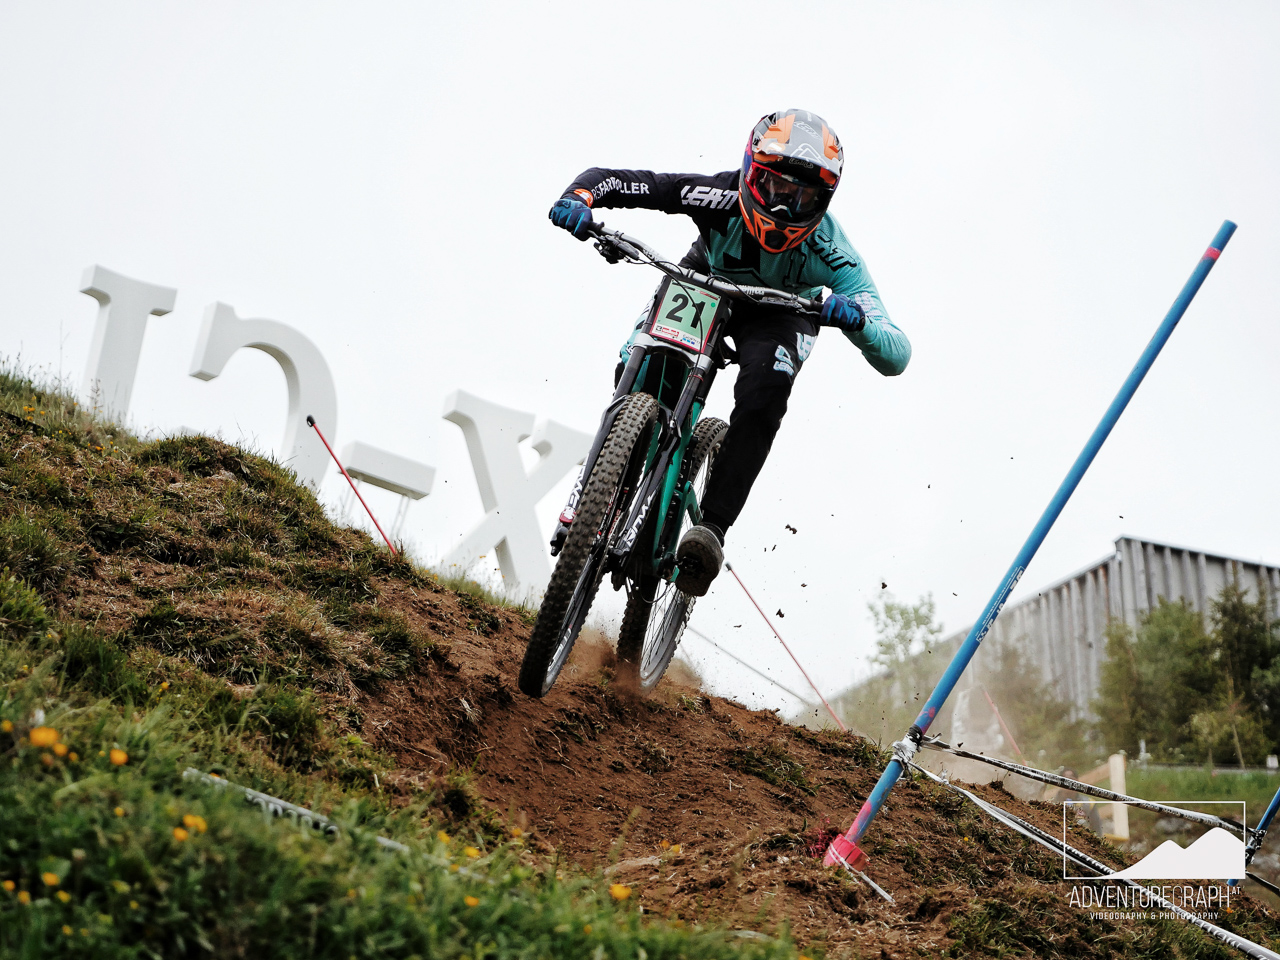 Downhill Worldcup race event with mountain bikes in Austria.